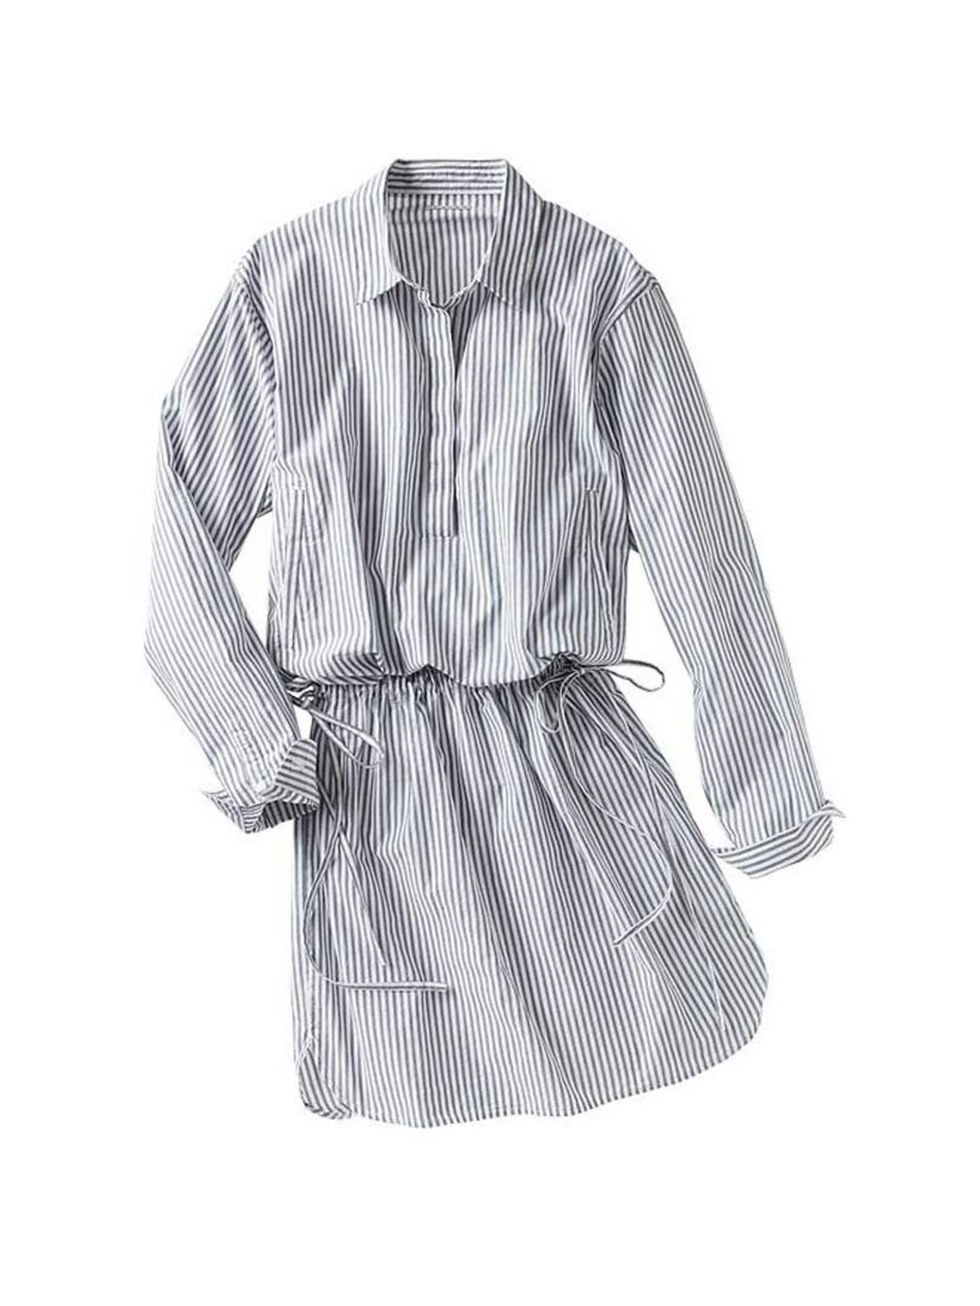 <p>Wear this lightweight cotton shirtdress with tan leather flat sandals for low-key summer style.</p><p><a href="http://www.gap.co.uk/browse/product.do?cid=1008651&vid=1&pid=000941919001">Gap</a> dress, £39.95</p>